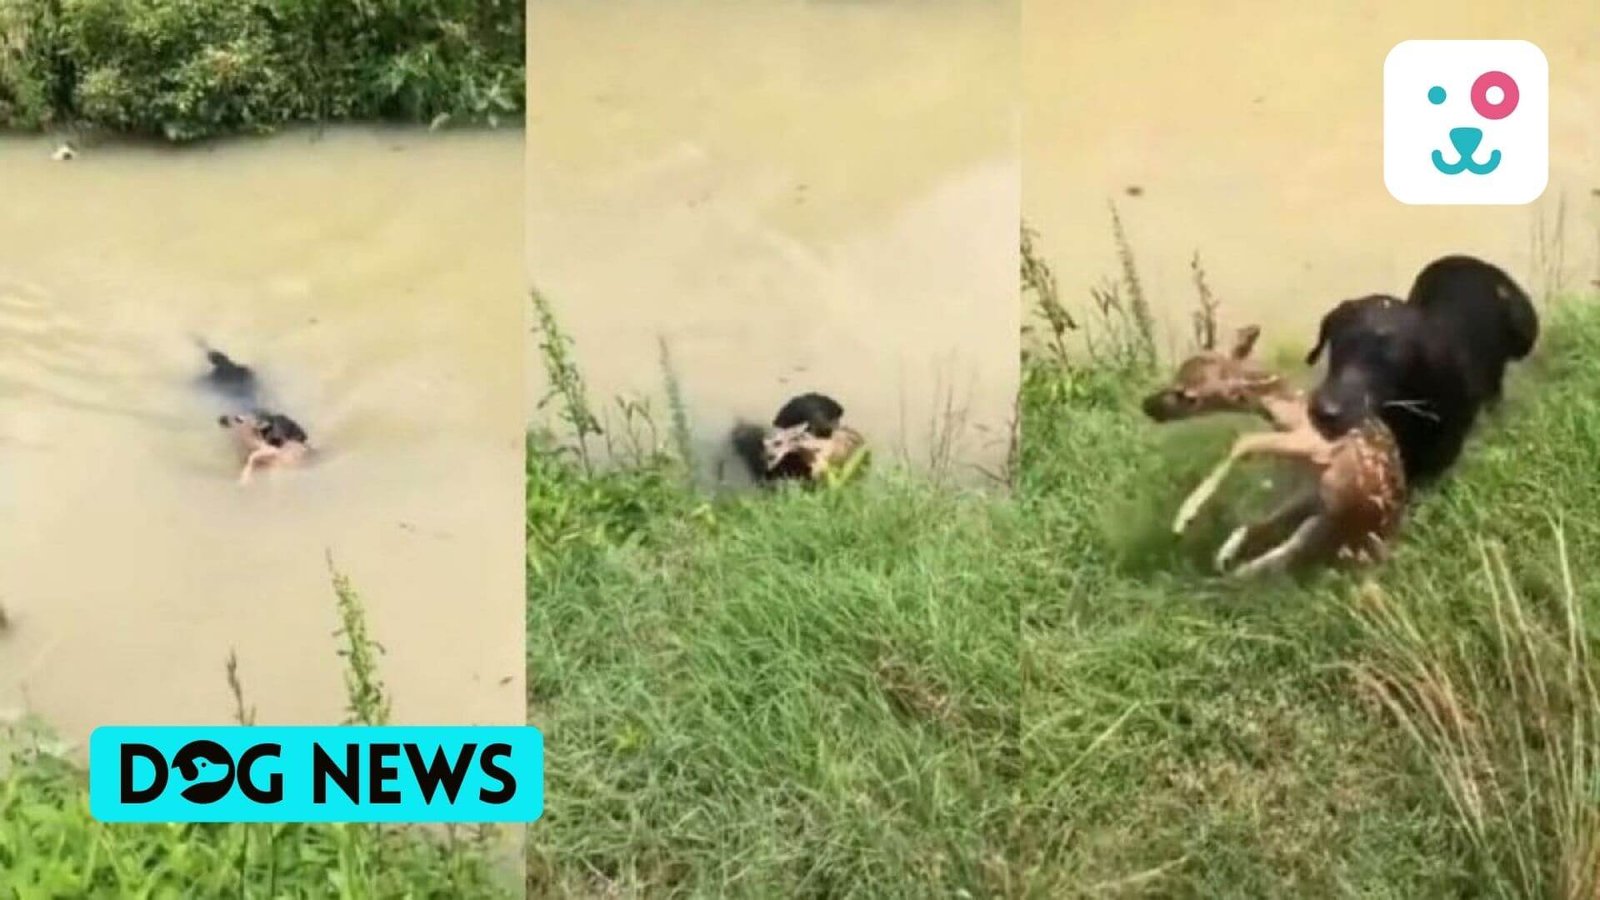 A dog’s bravery saves the life of a drowning baby deer